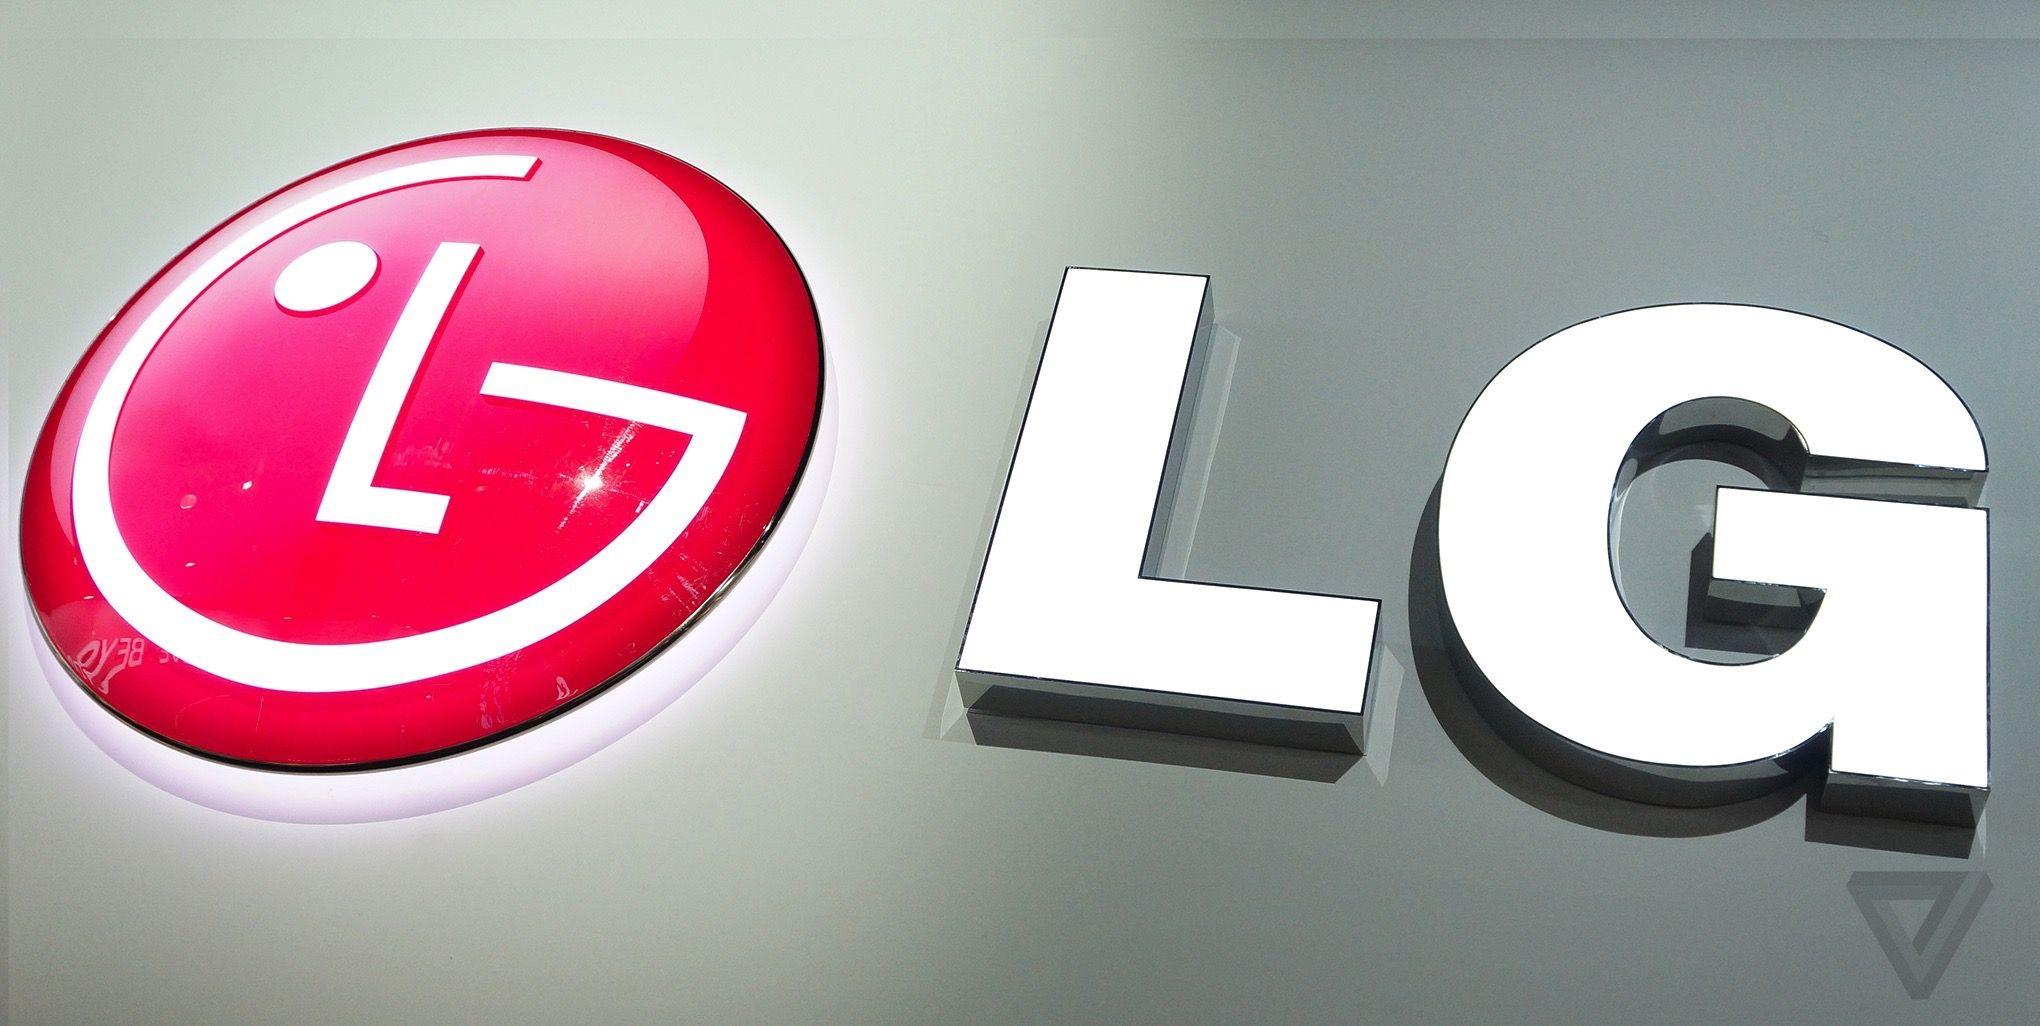 LG Logo - LG has quietly updated its logo | The Verge